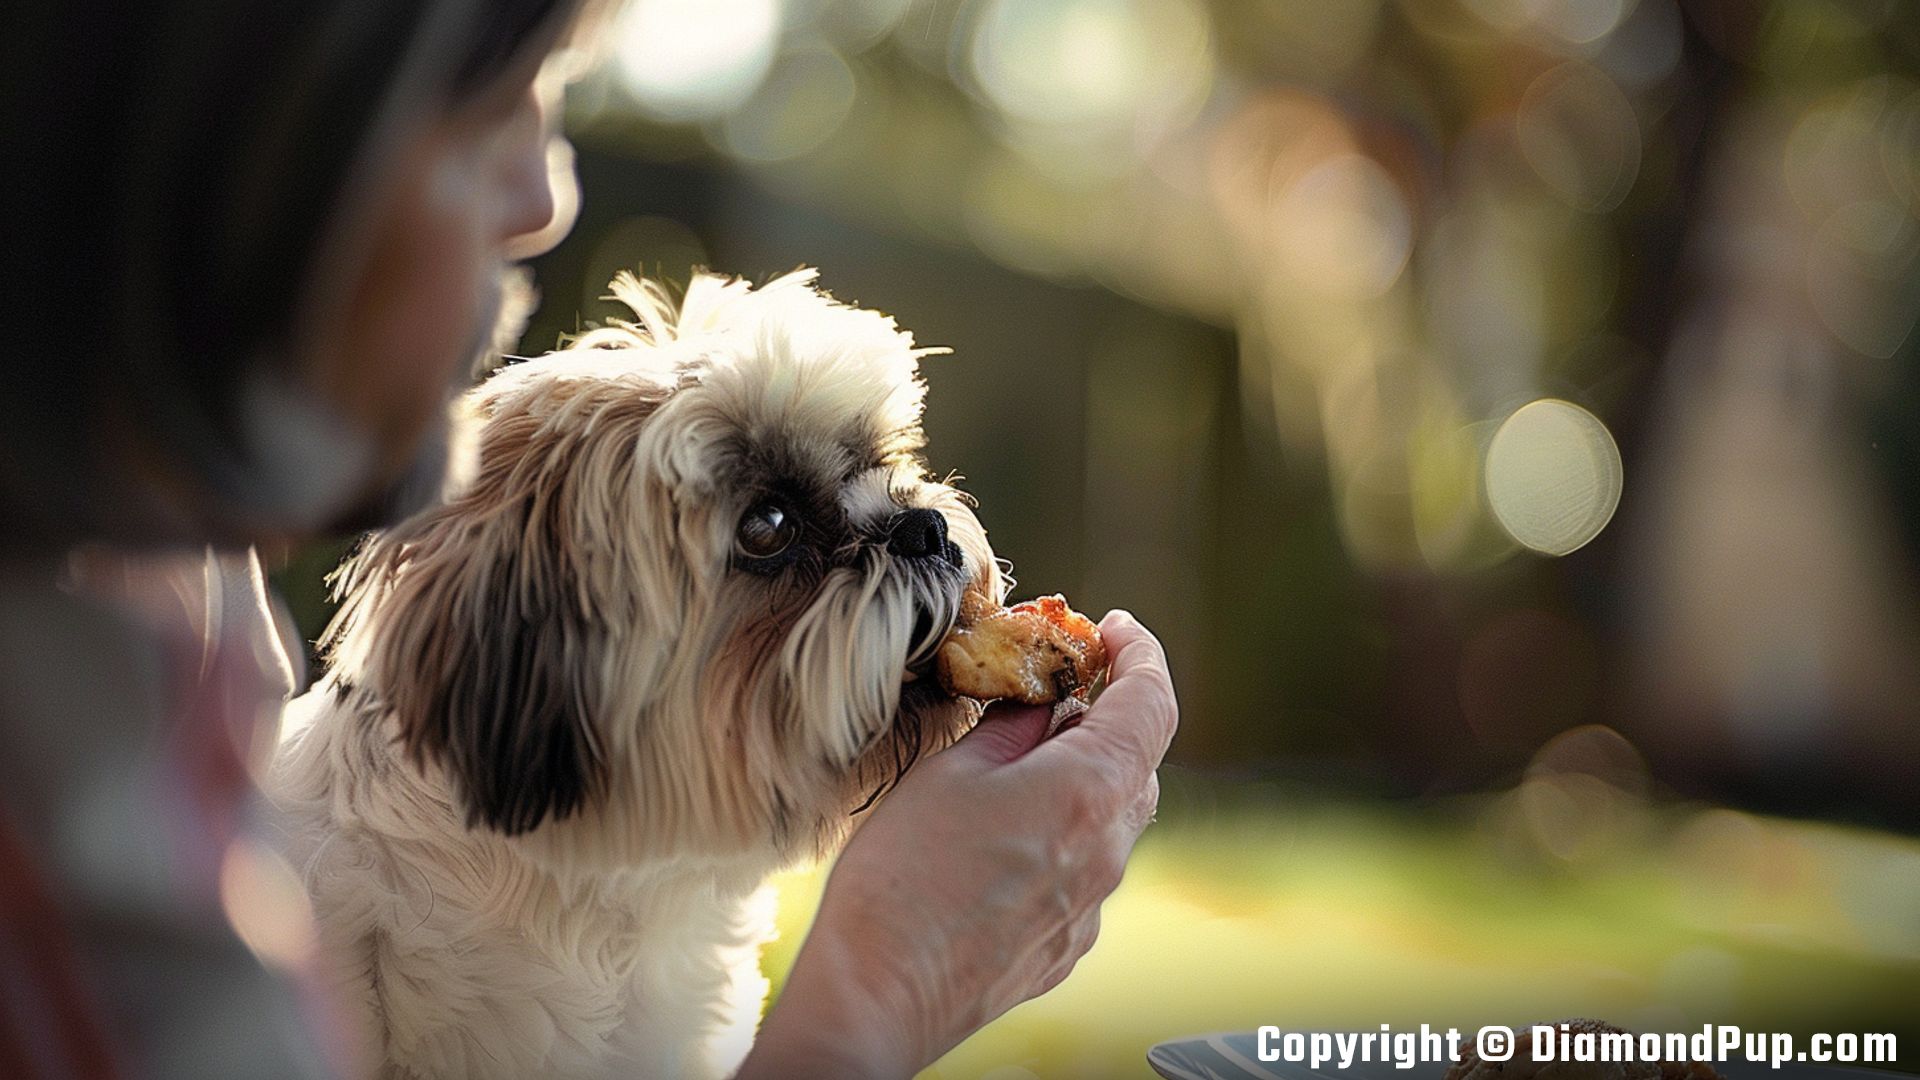 Photo of a Playful Shih Tzu Snacking on Chicken